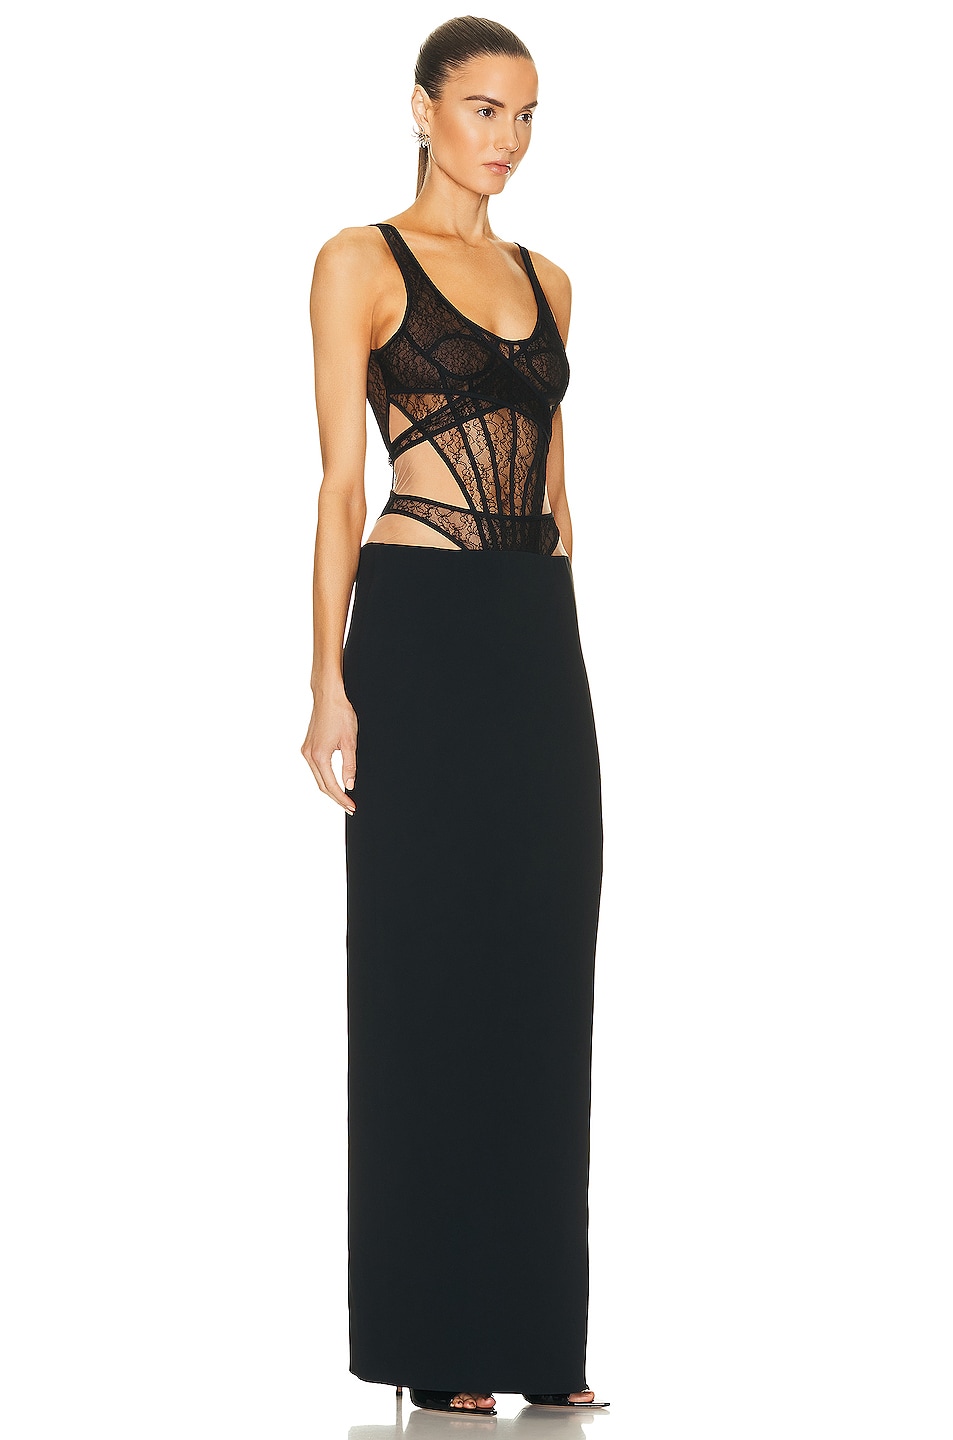 David Koma Boning Over Layer Net Top Gown in Black | FWRD